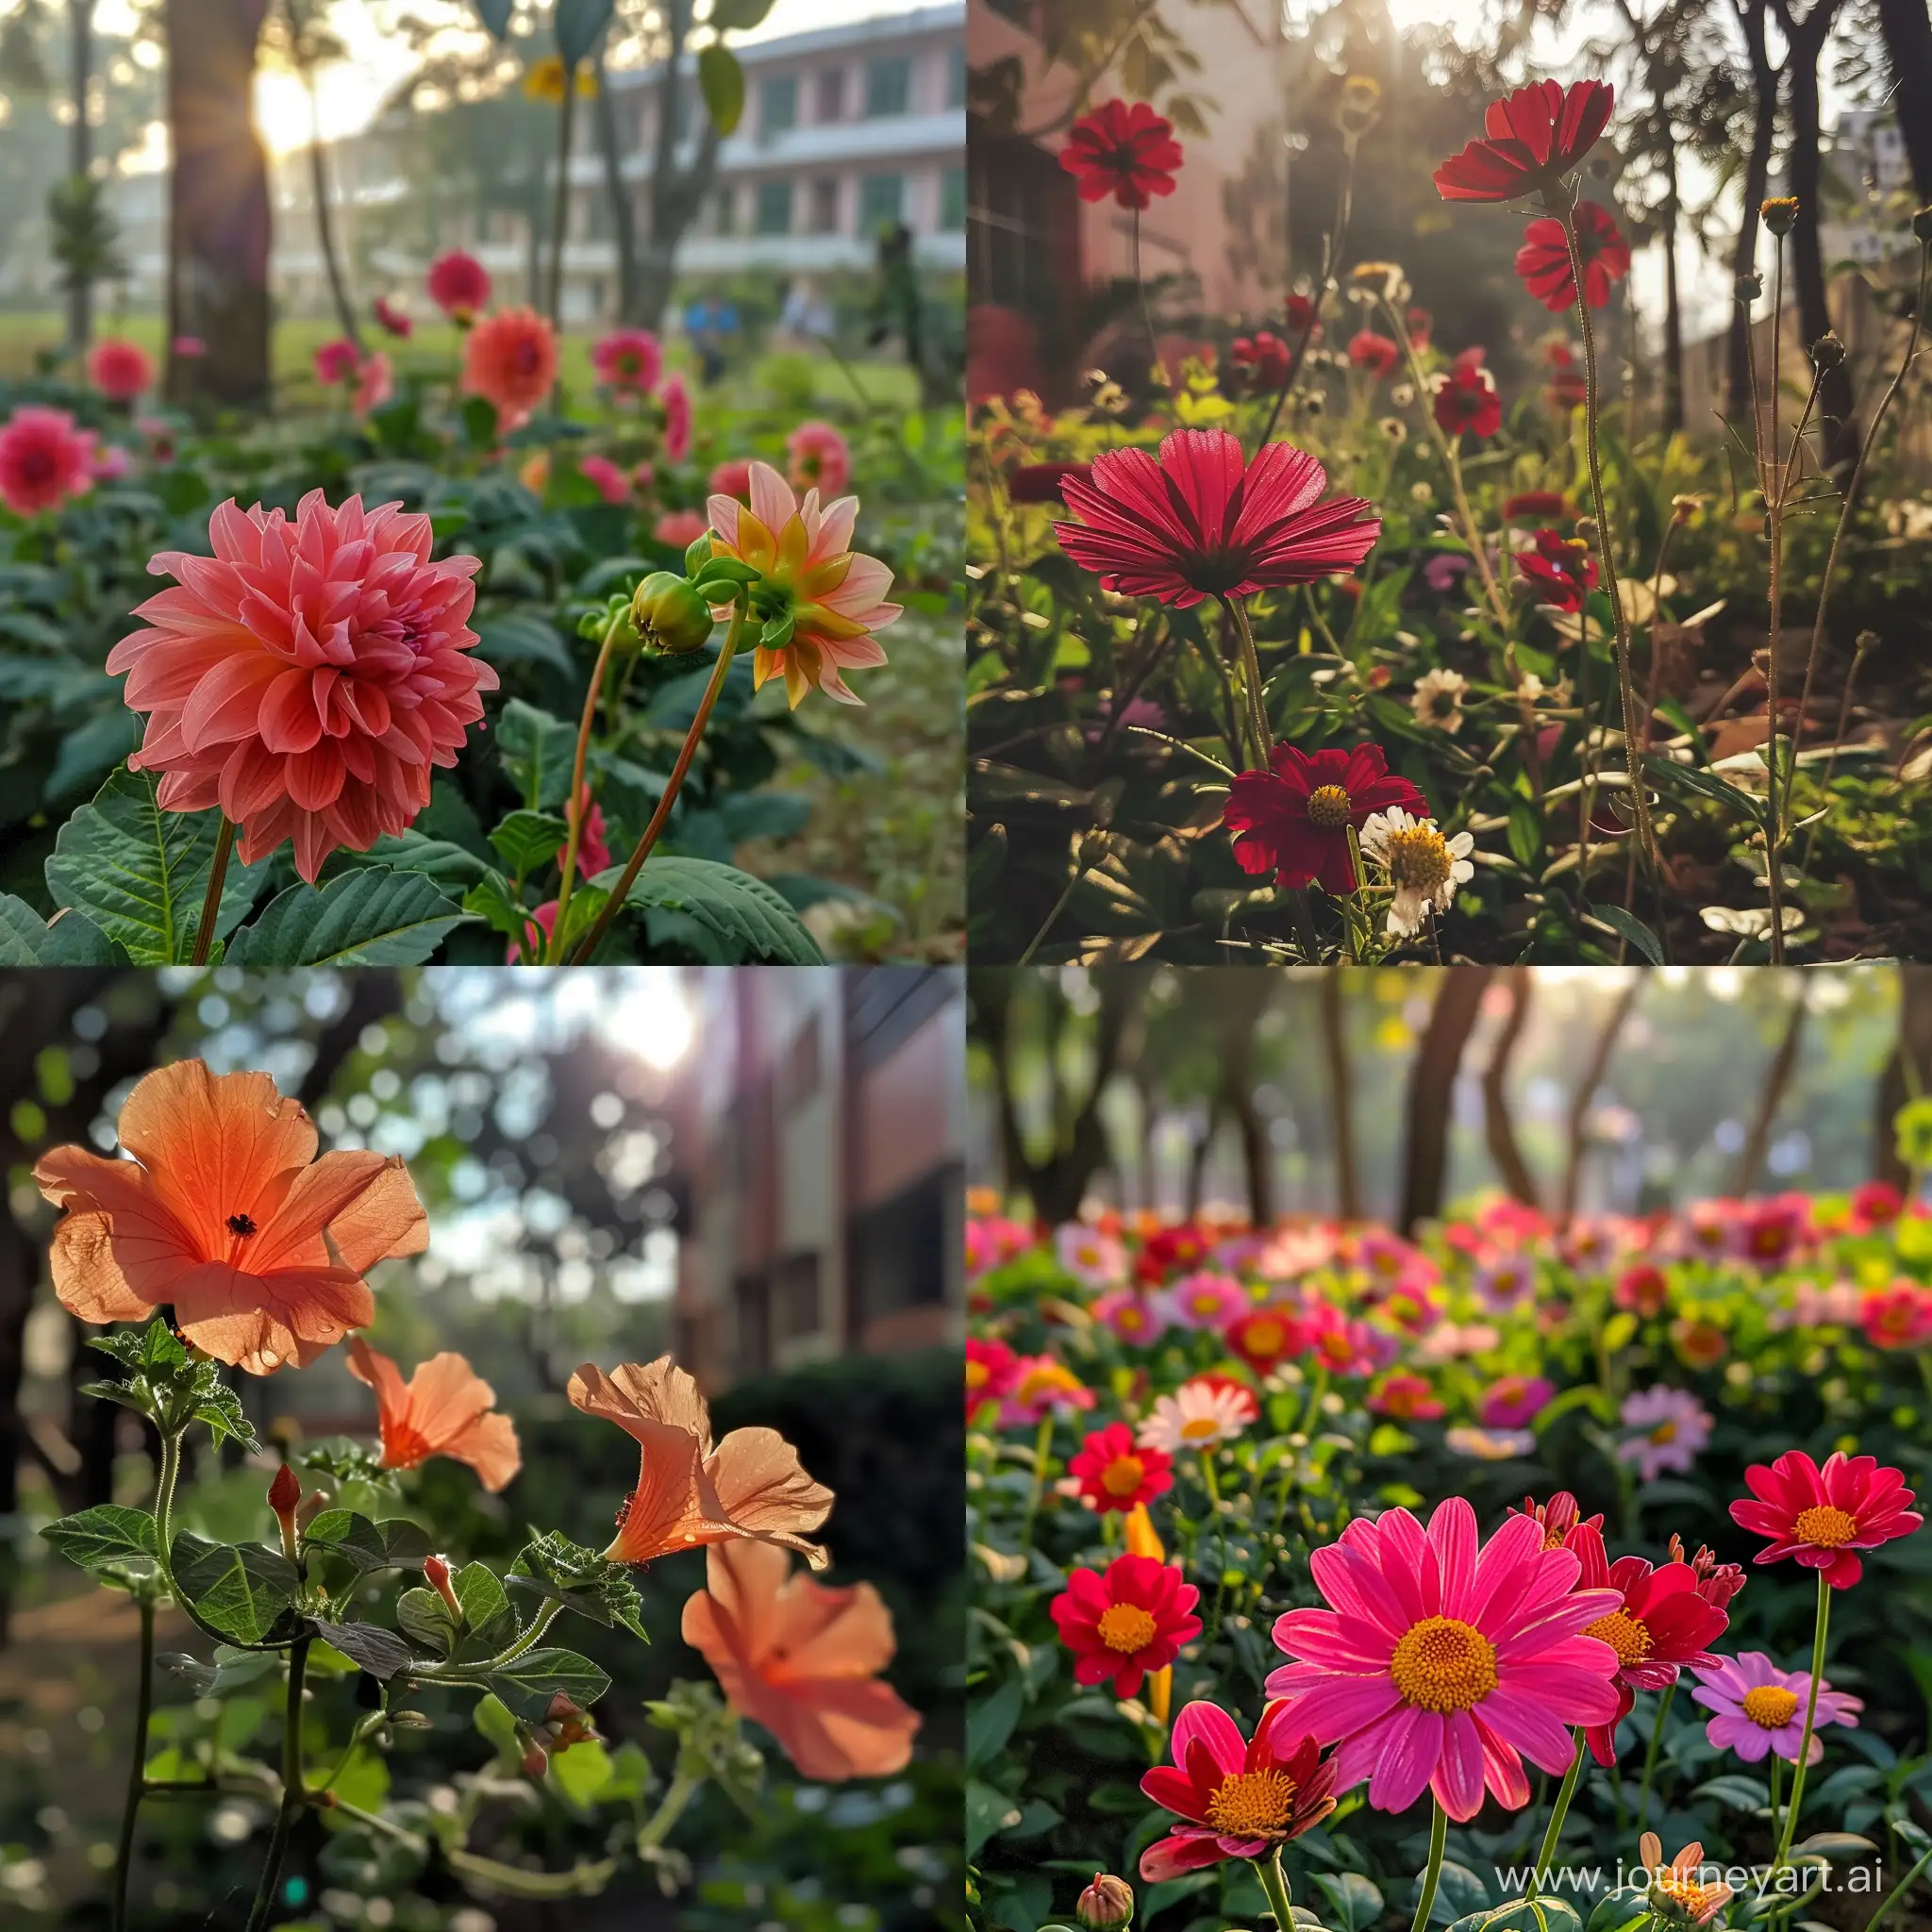 Vibrant-College-Morning-Capturing-the-Beauty-of-Flowers-with-Mobile-Phone